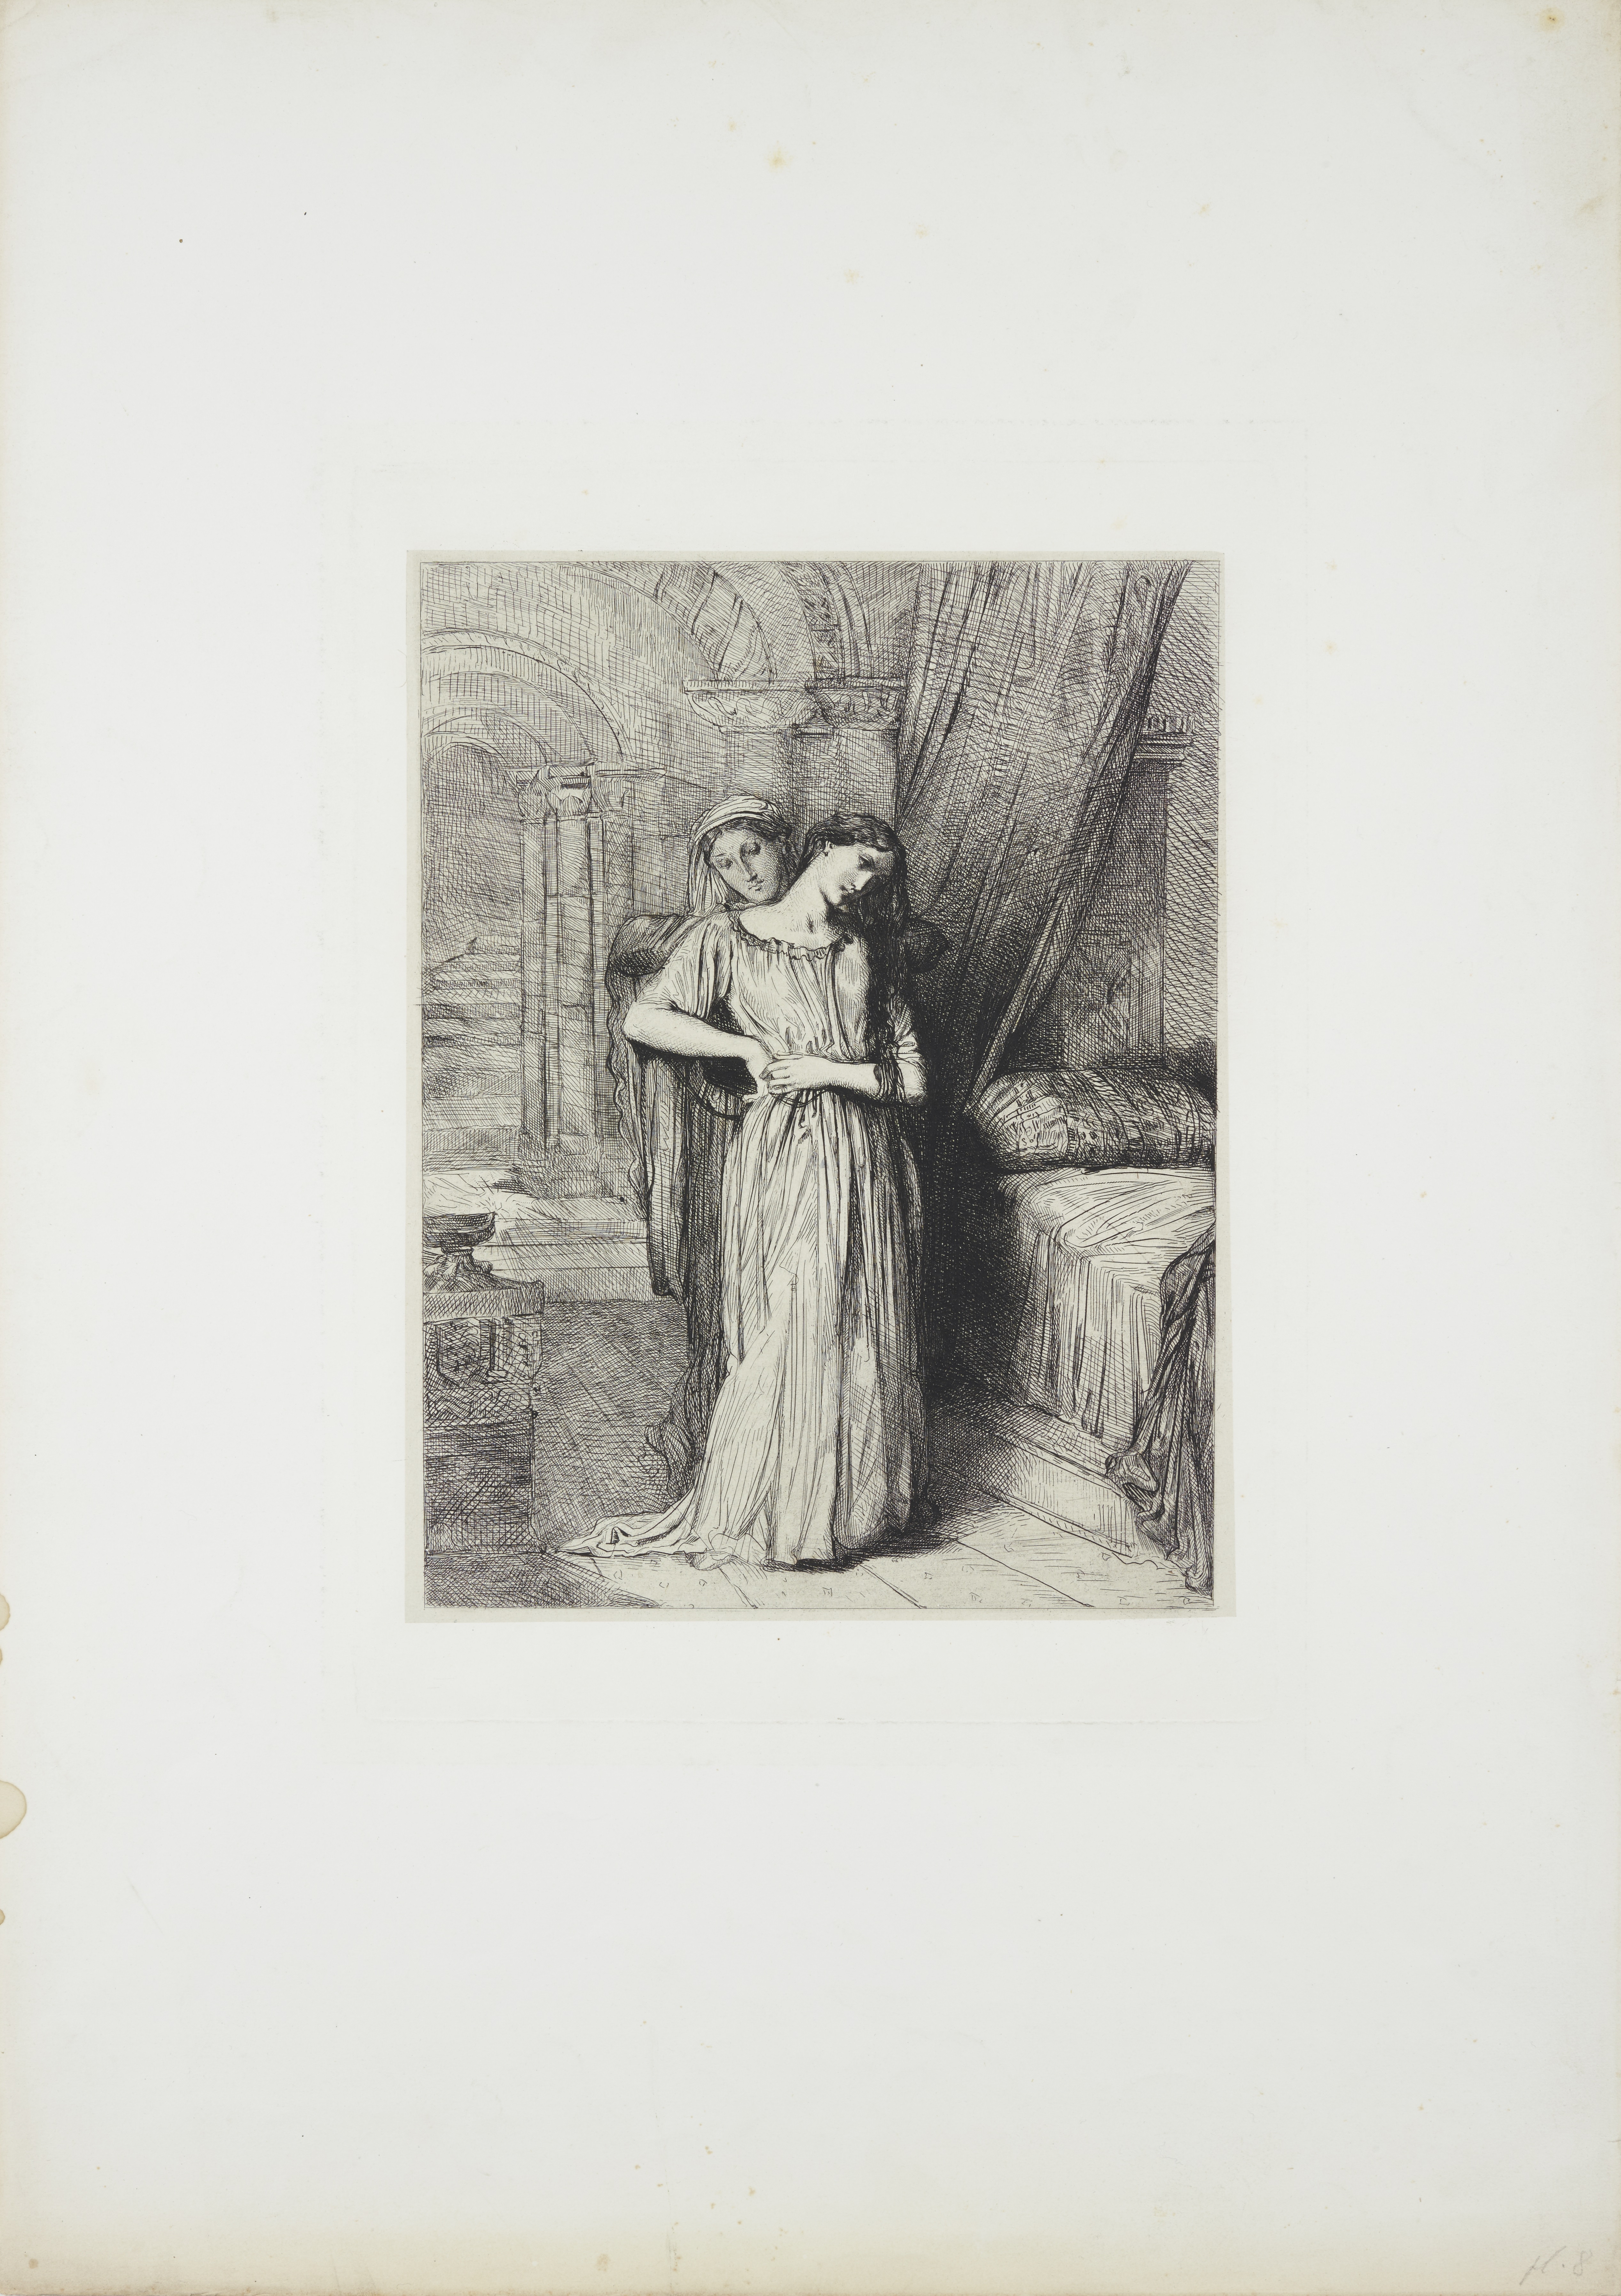 image: ‘If I do die before thee, prithee shroud me’ (Act IV, Scene 3) plate 8 from the series ‘Othello’